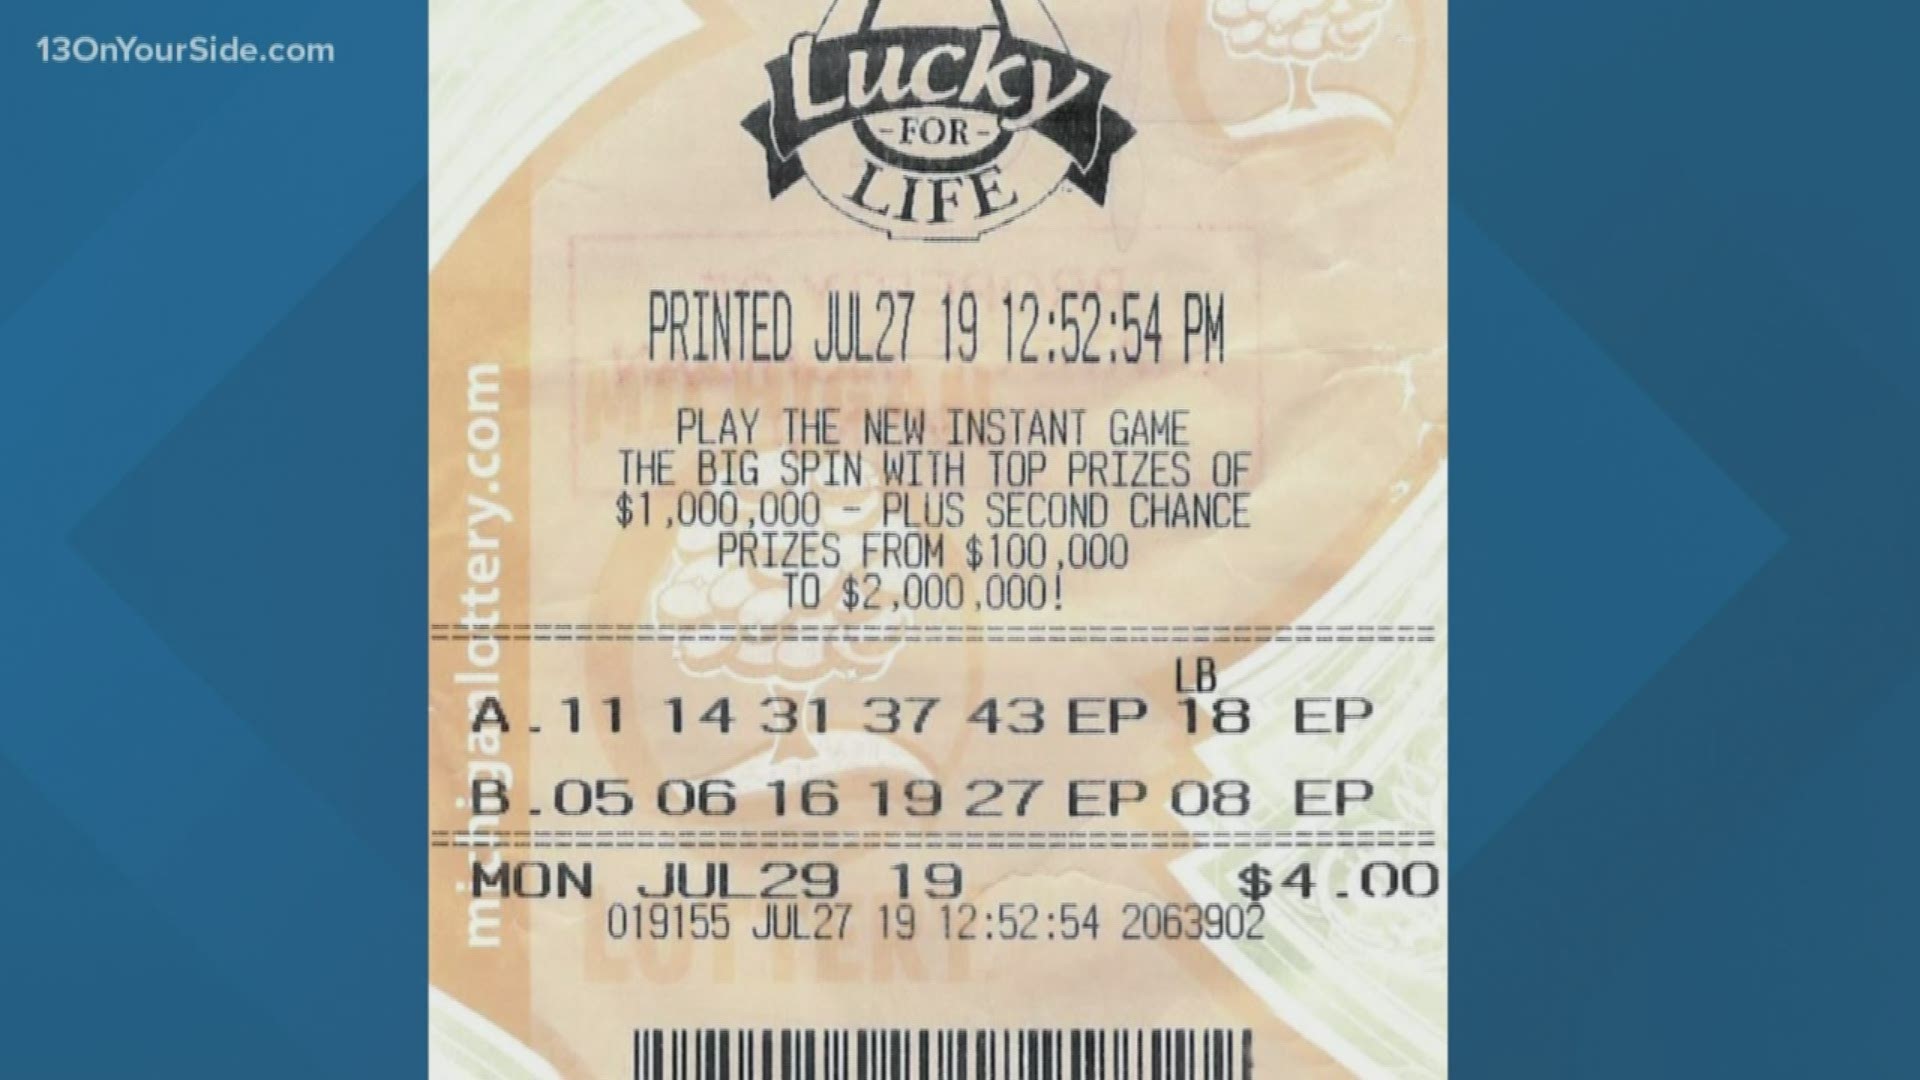 A Kansas woman is having an unforgettable vacation after winning $25,000 a year for life playing the Michigan Lottery's Lucky For Life game.